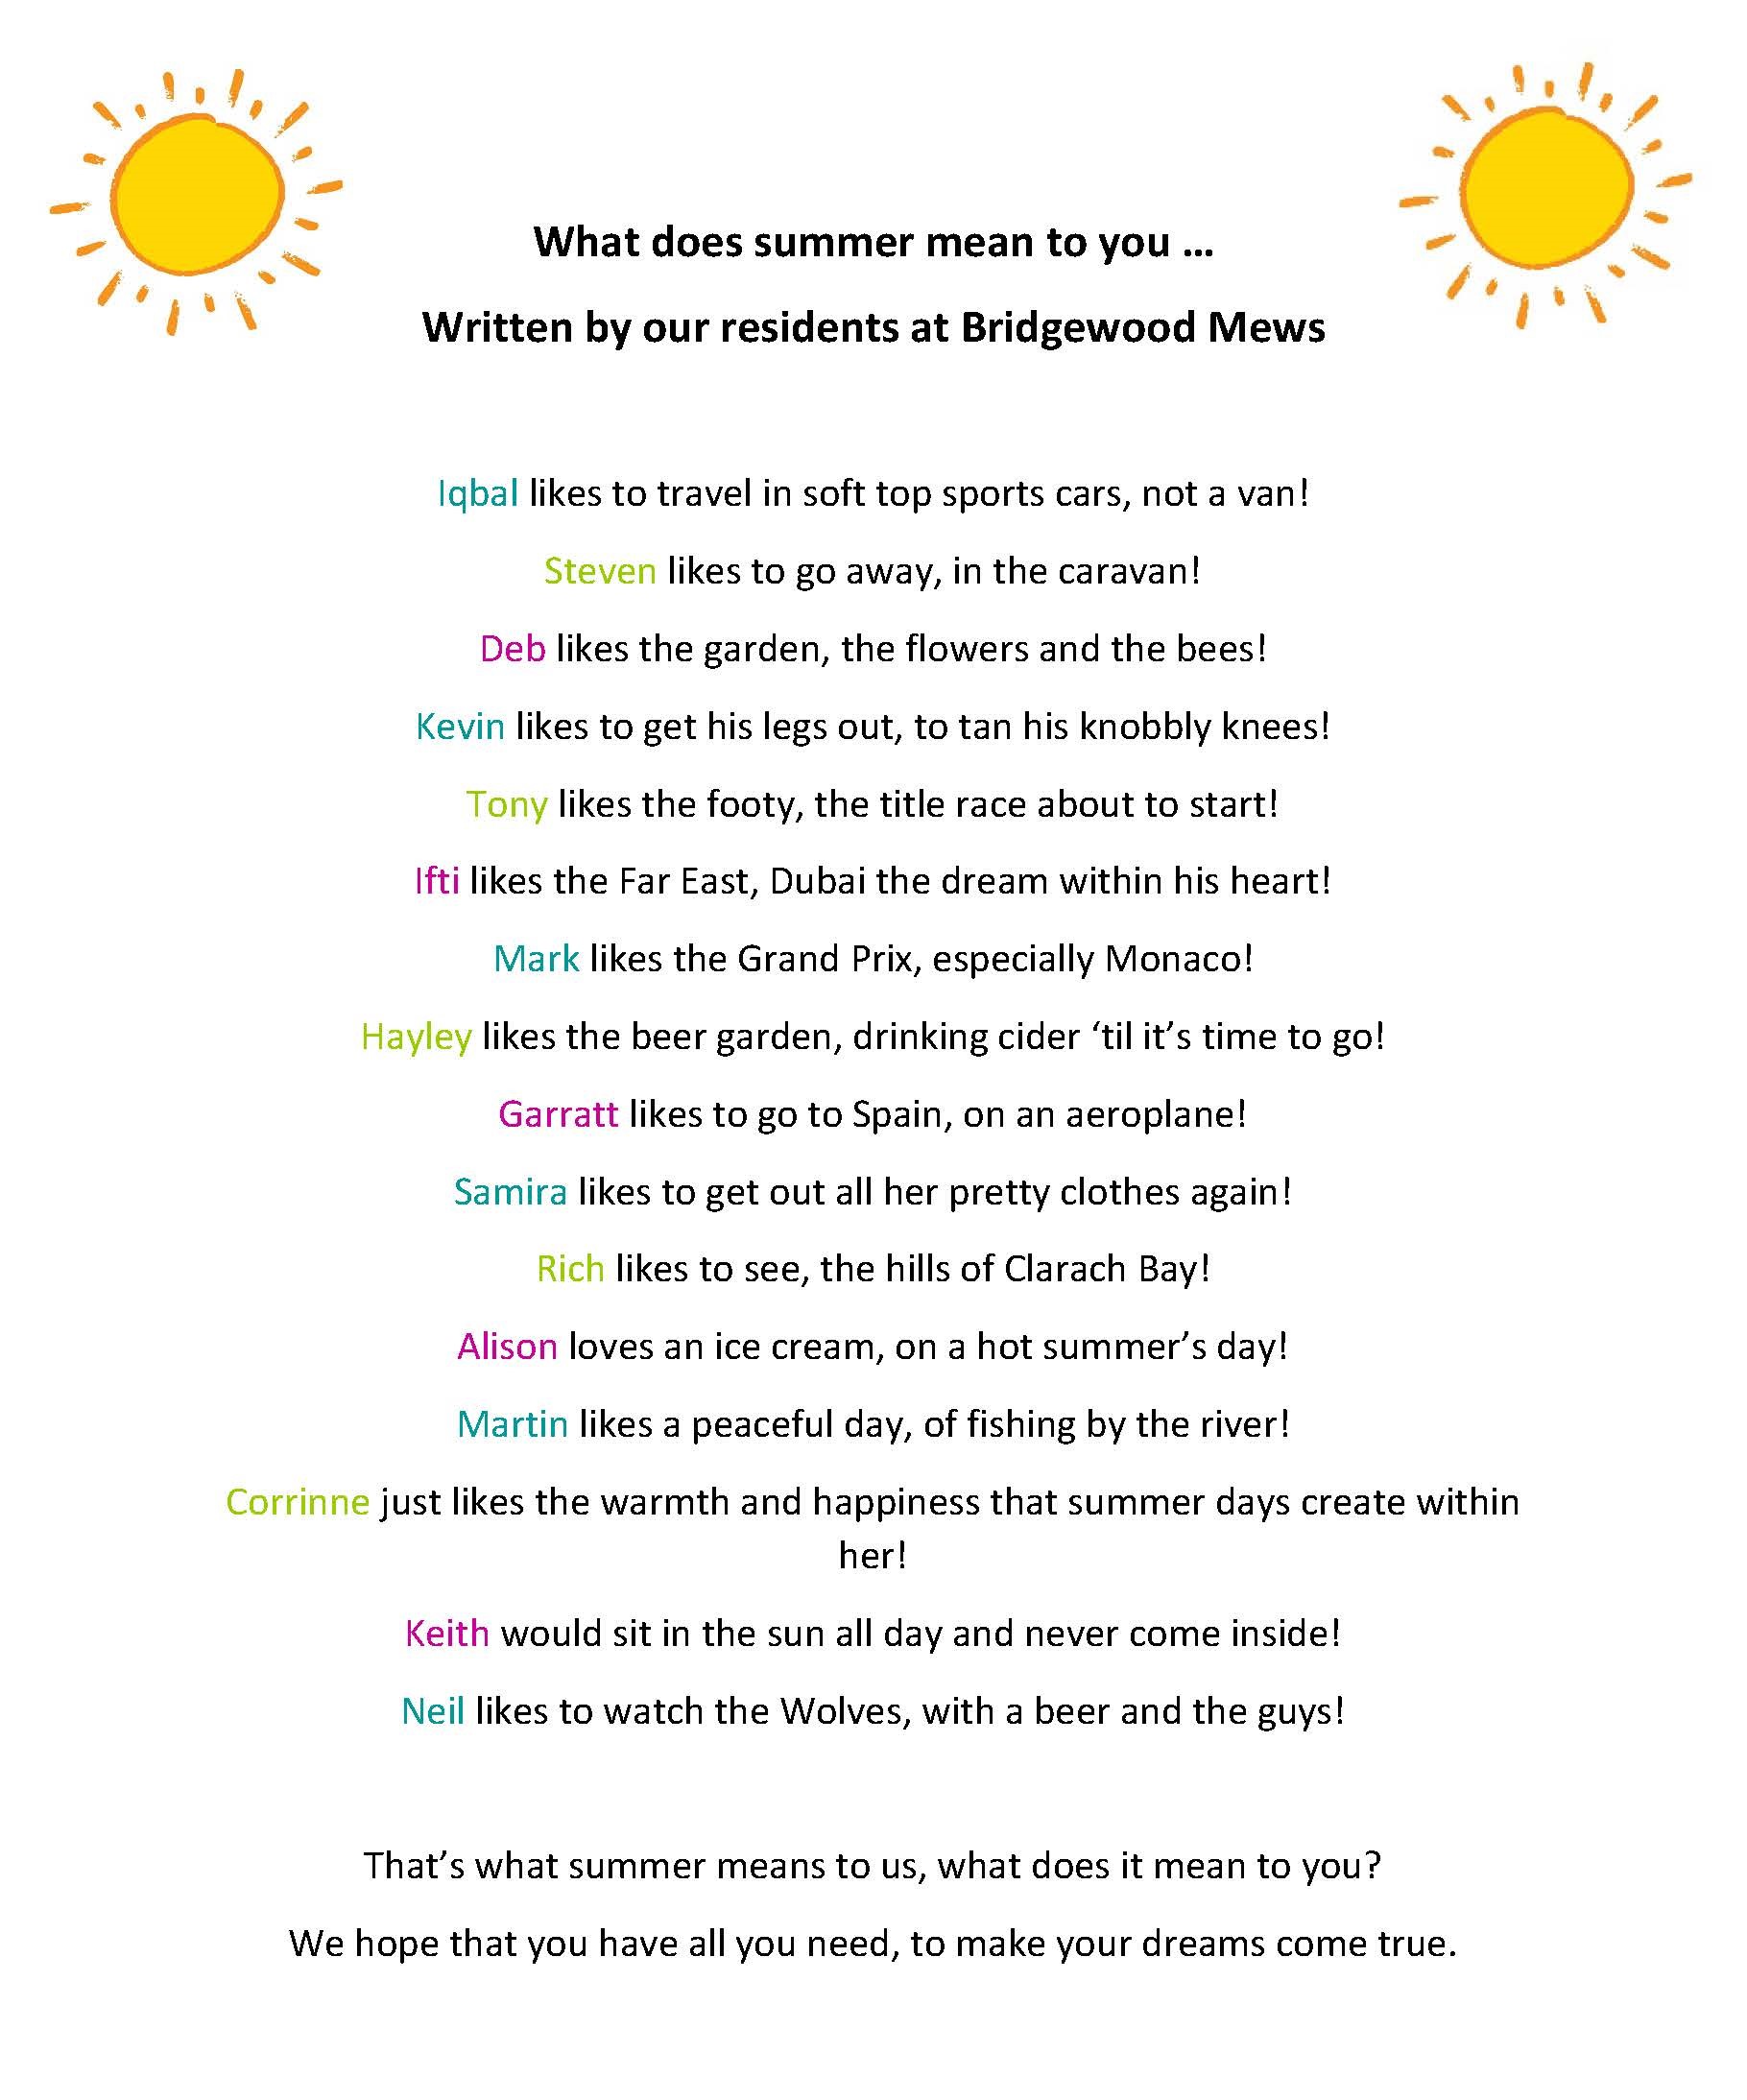 A poem about summer from residents and colleagues at Bridgewood Mews